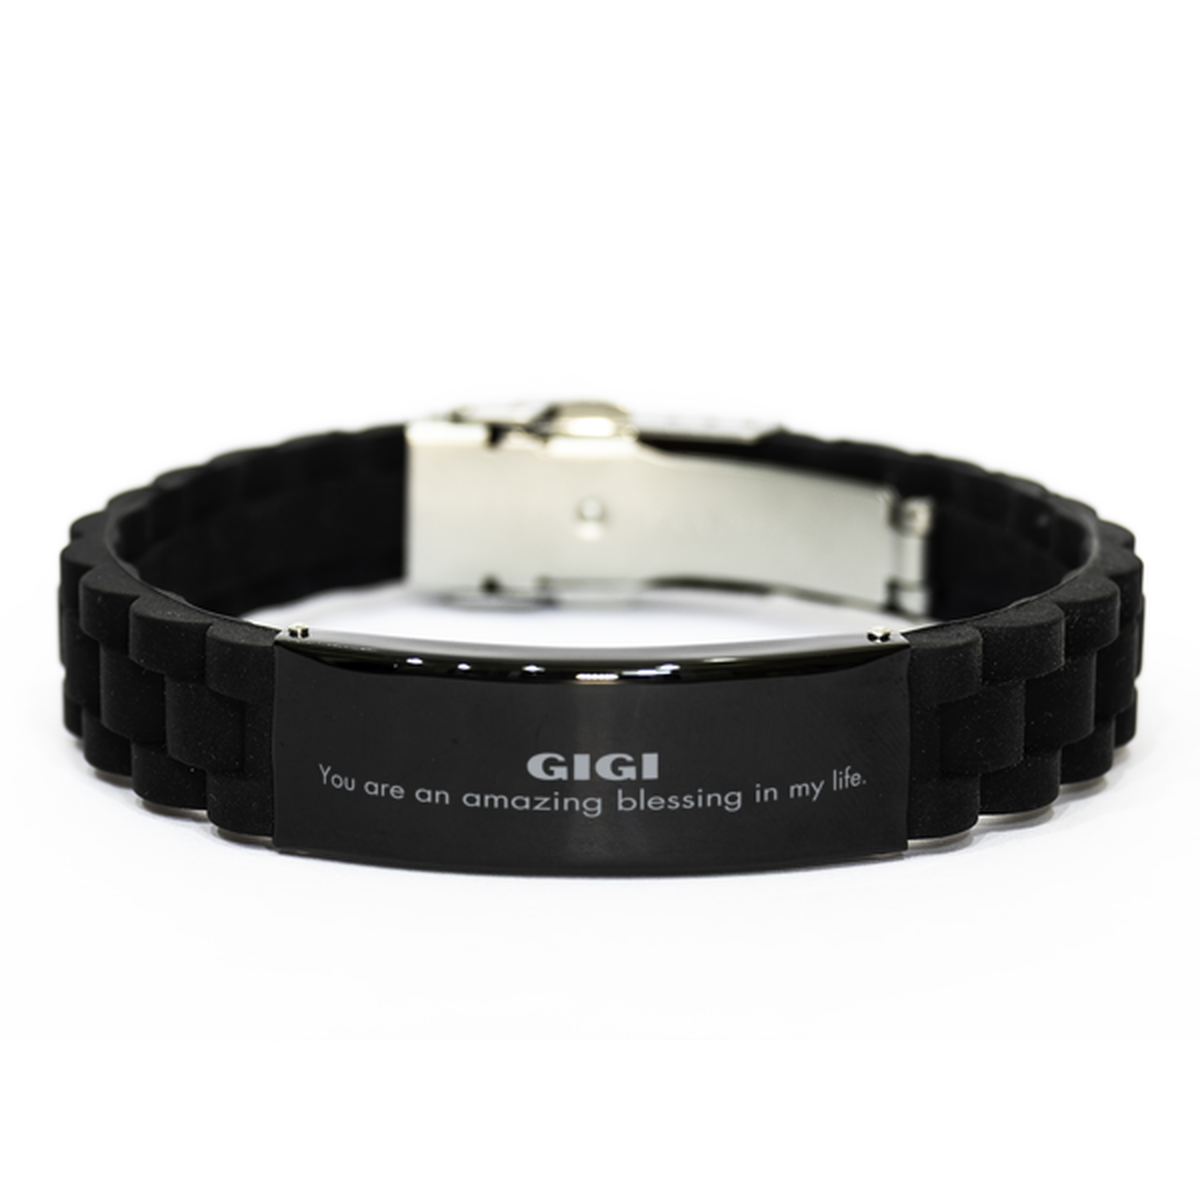 Gigi Black Glidelock Clasp Bracelet, You are an amazing blessing in my life, Thank You Gifts For Gigi, Inspirational Birthday Christmas Unique Gifts For Gigi